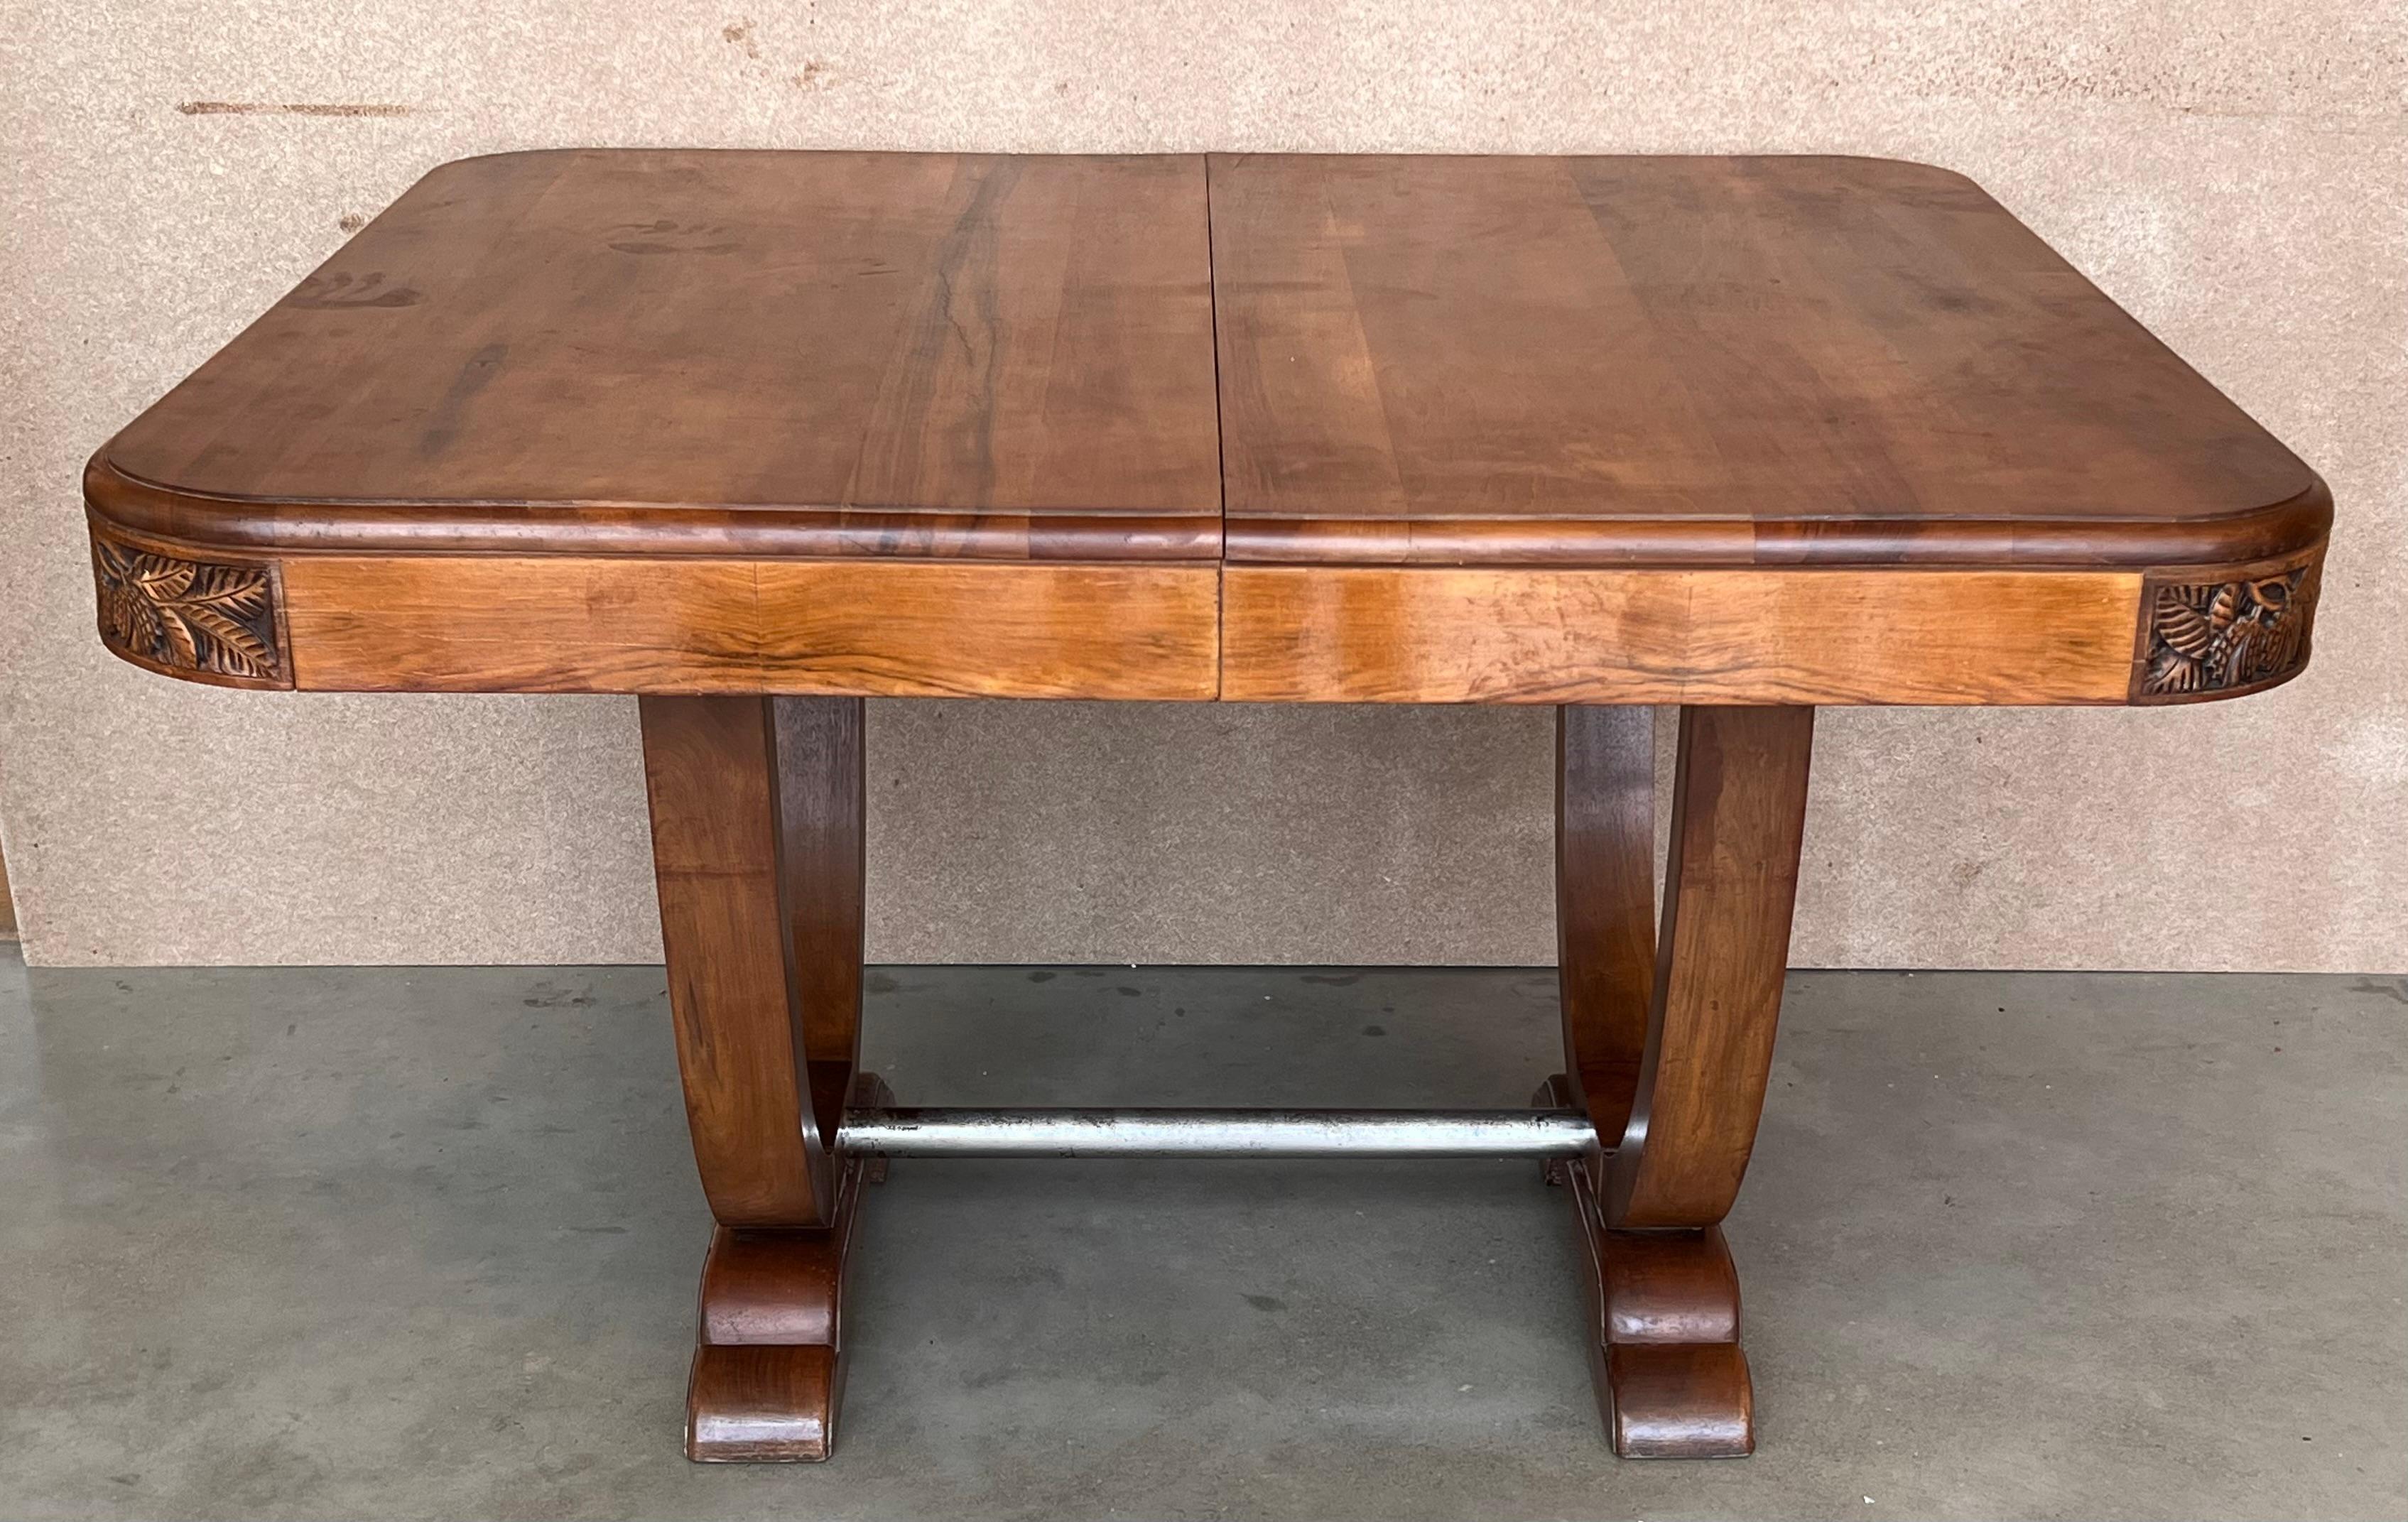 Fabulous custom made walnut dining table which extends Table is 41.3 in x 46.65 in without the leafs which mount to the center seamlessly. Custom made 60 yrs. ago and in magnificent condition. Very solid table with beautiful graining. Arched